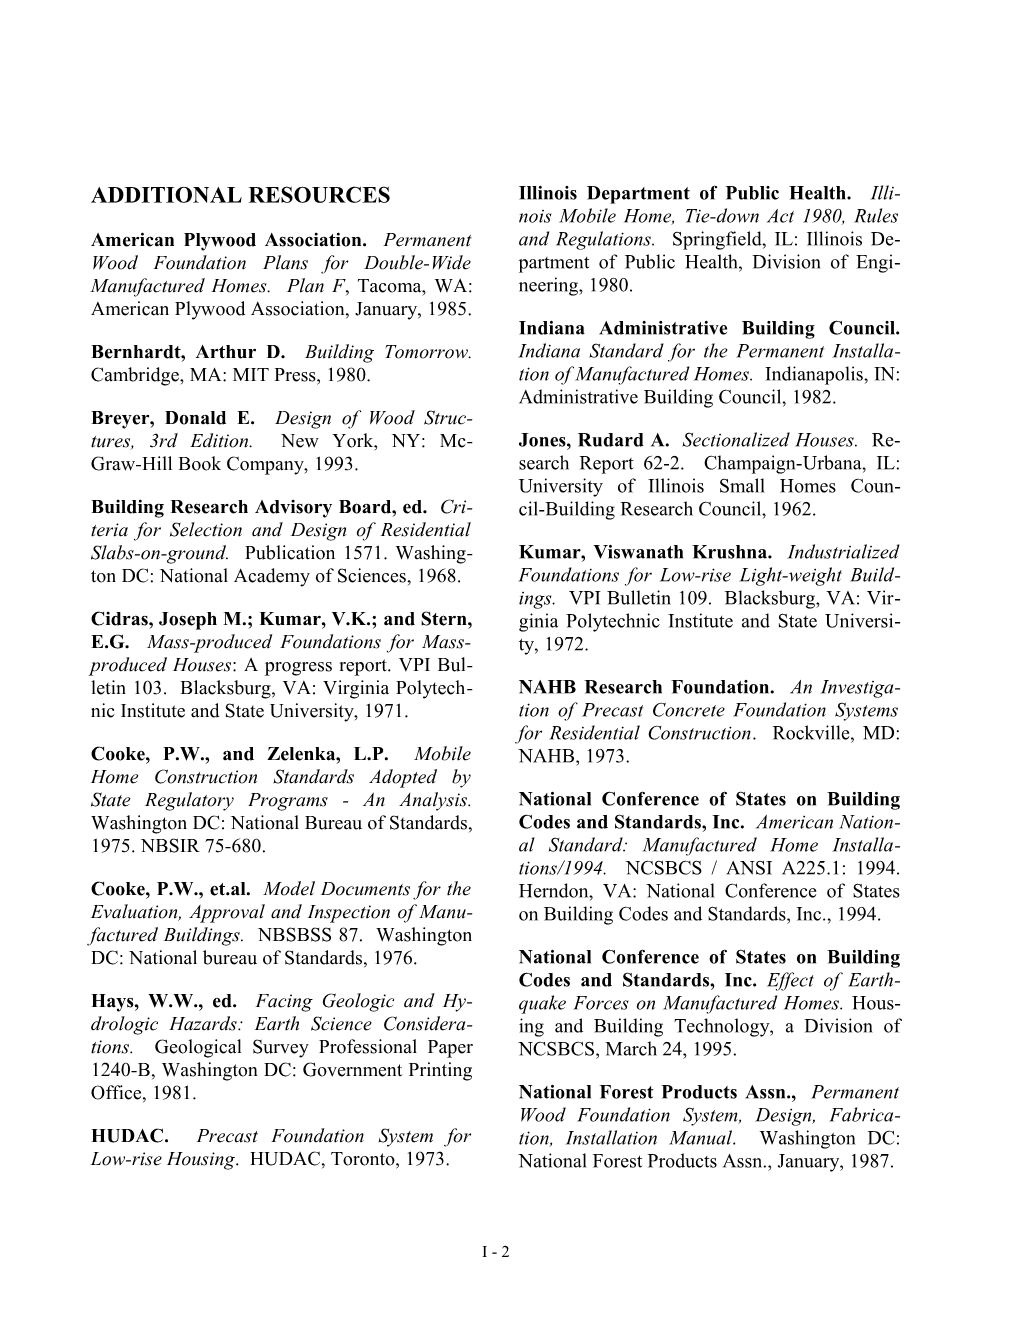 Appendix I References and Additional Resources